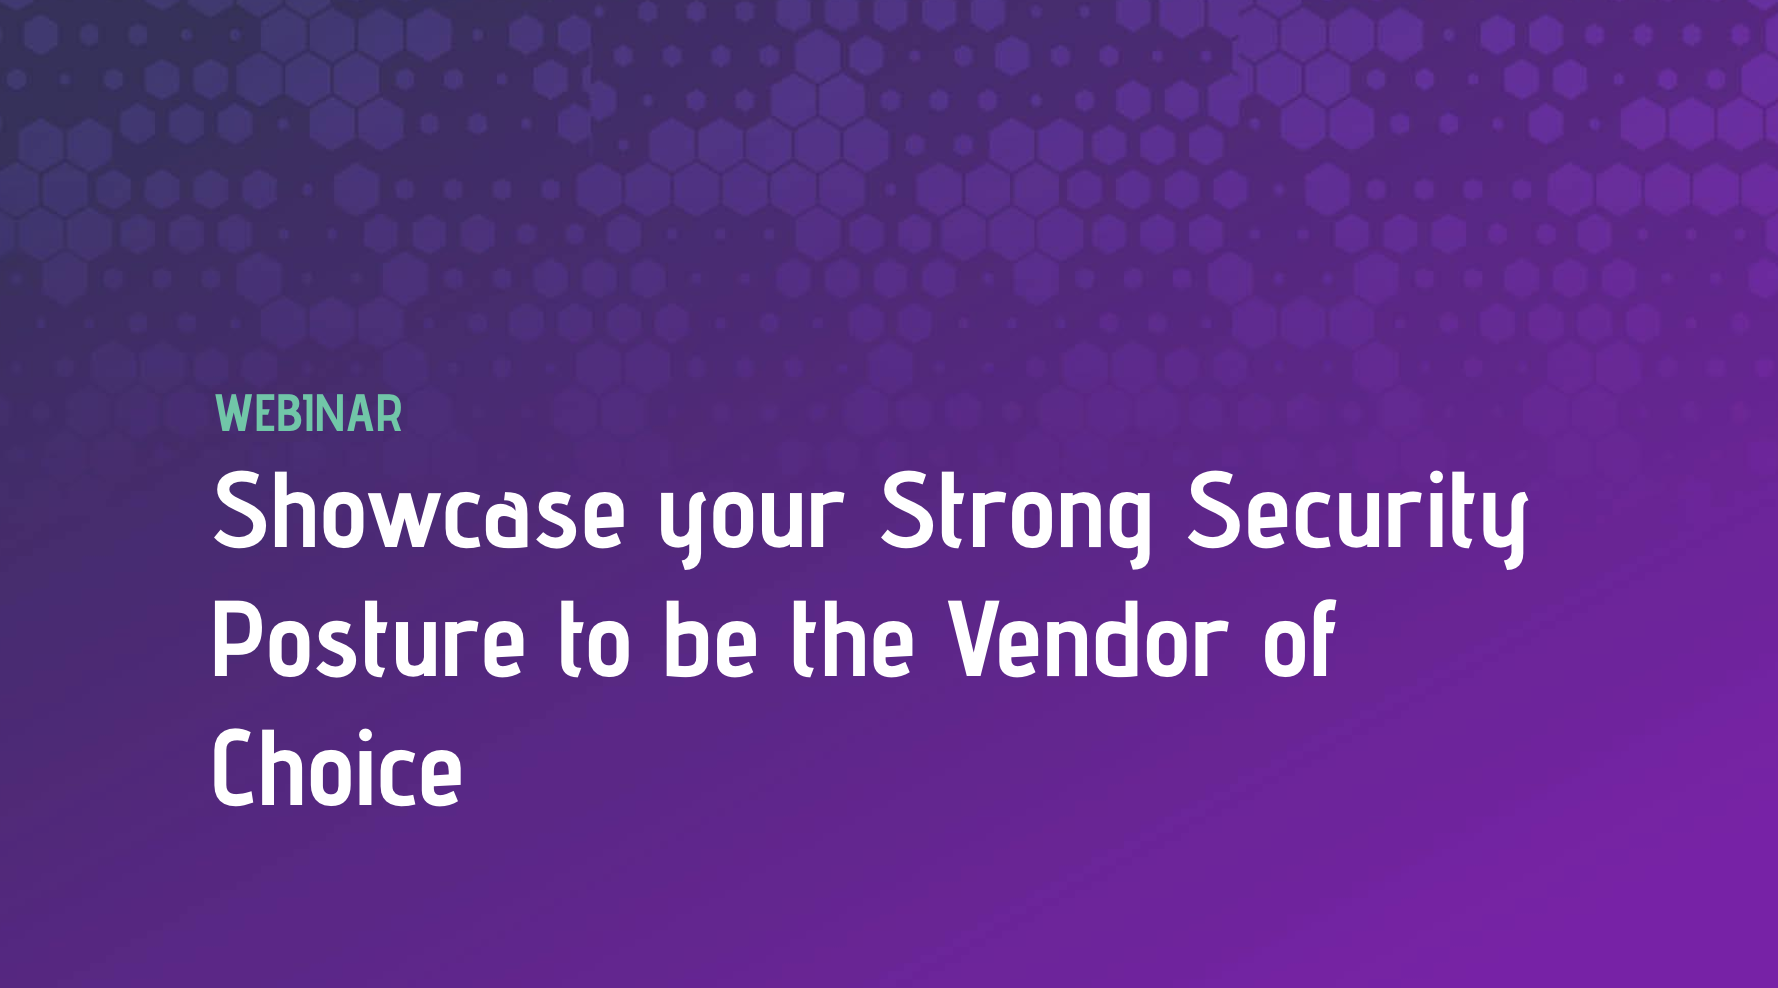 Showcase your Strong Security Posture to be the Vendor of Choice